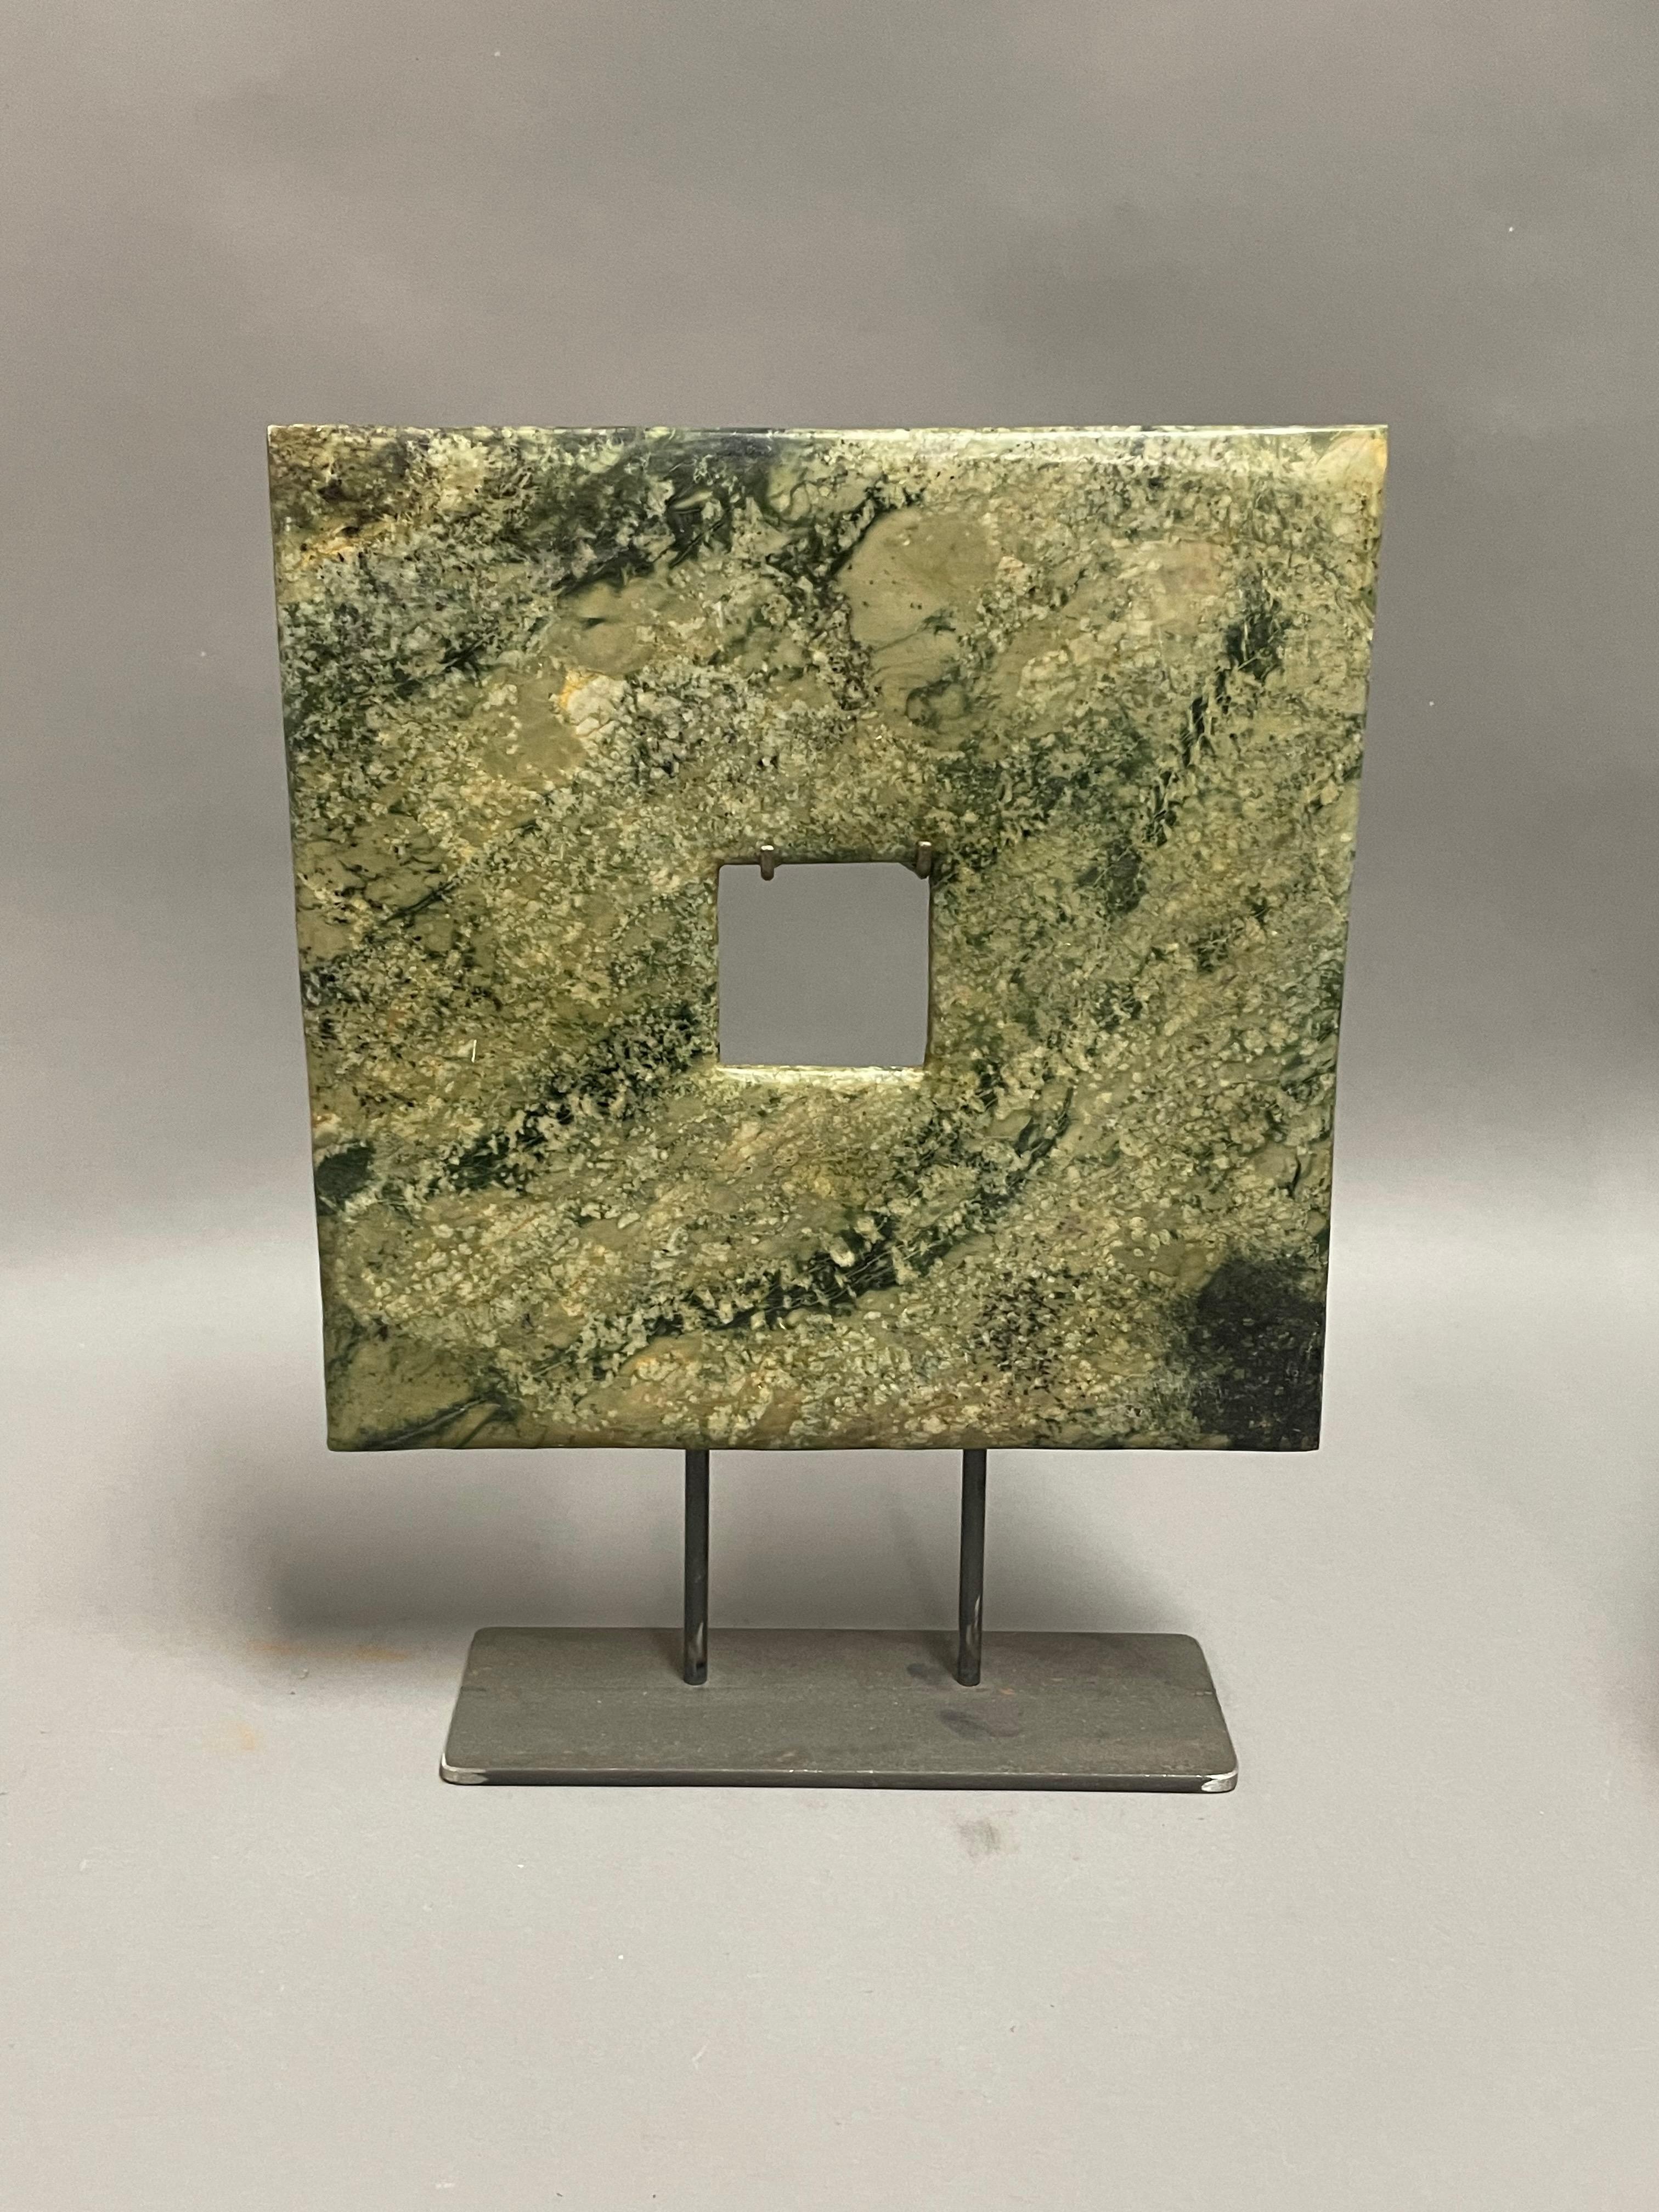 Contemporary Chinese set of three square and rectangular shaped jade discs.
Small square disc measures 6d  x  8.5h     stand measures  6  x  2
Large square disc measures 10d  x  13h    stand measures  8  x  3
Rectangular disc measures   12d  x  9.5h